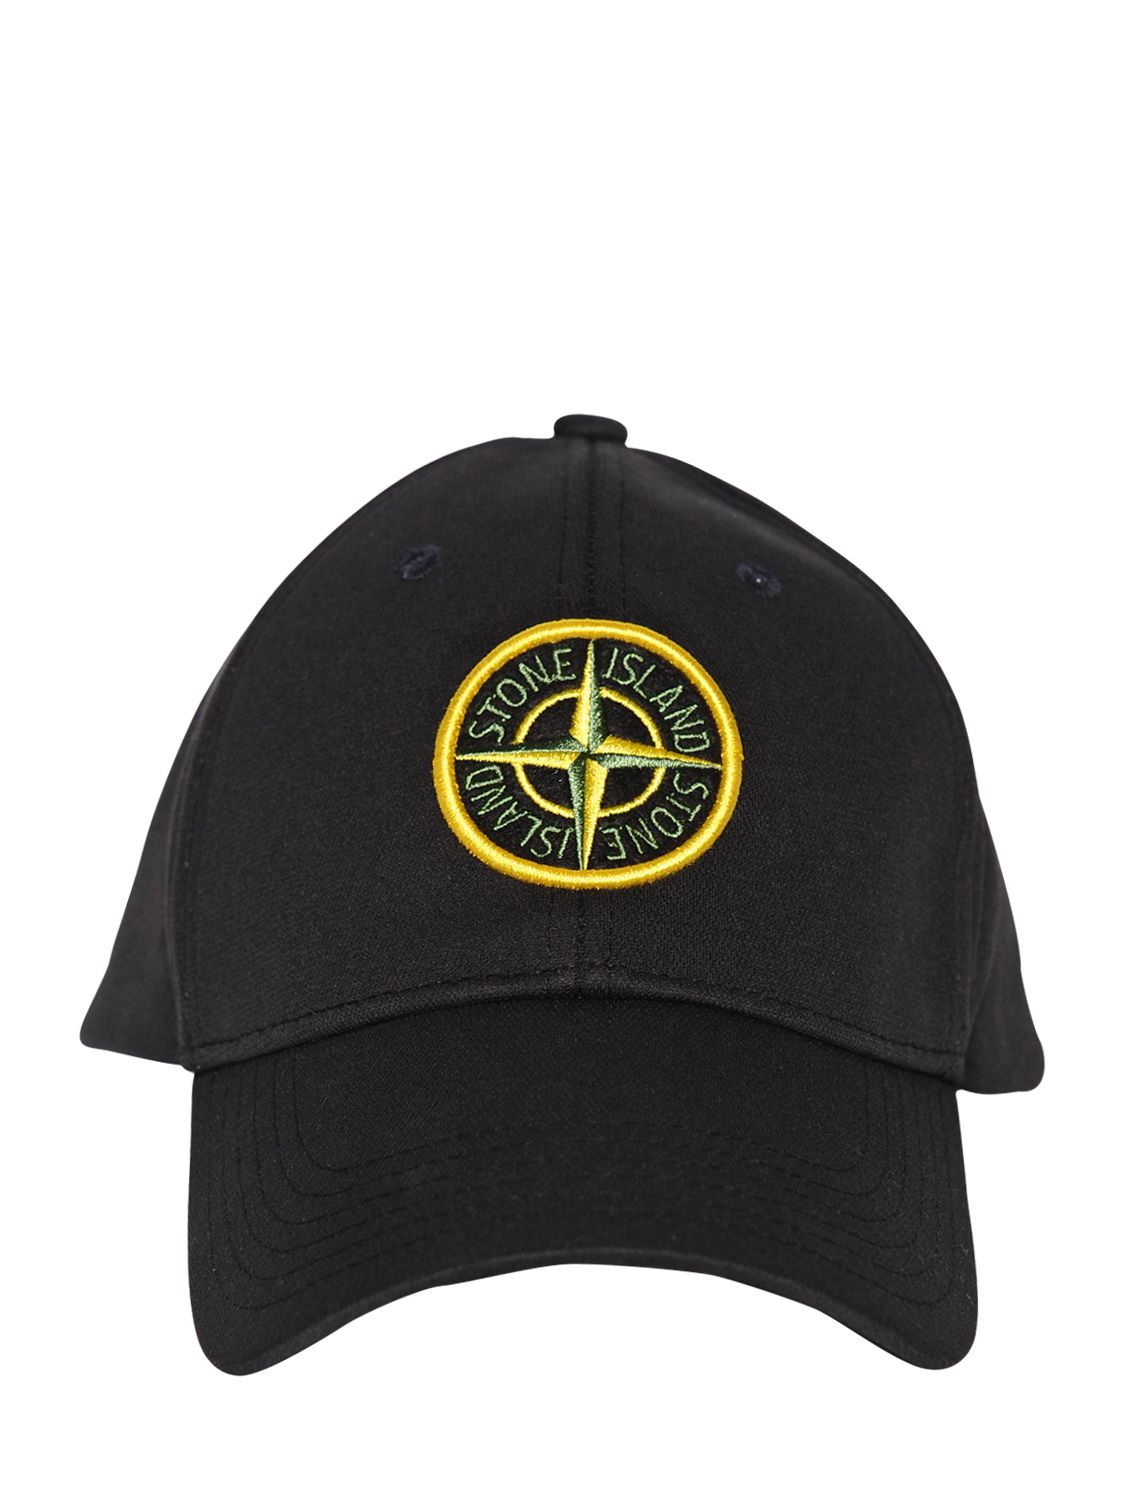 Stone Island Logo Embroidered Softshell Baseball Hat in Black for Men - Lyst